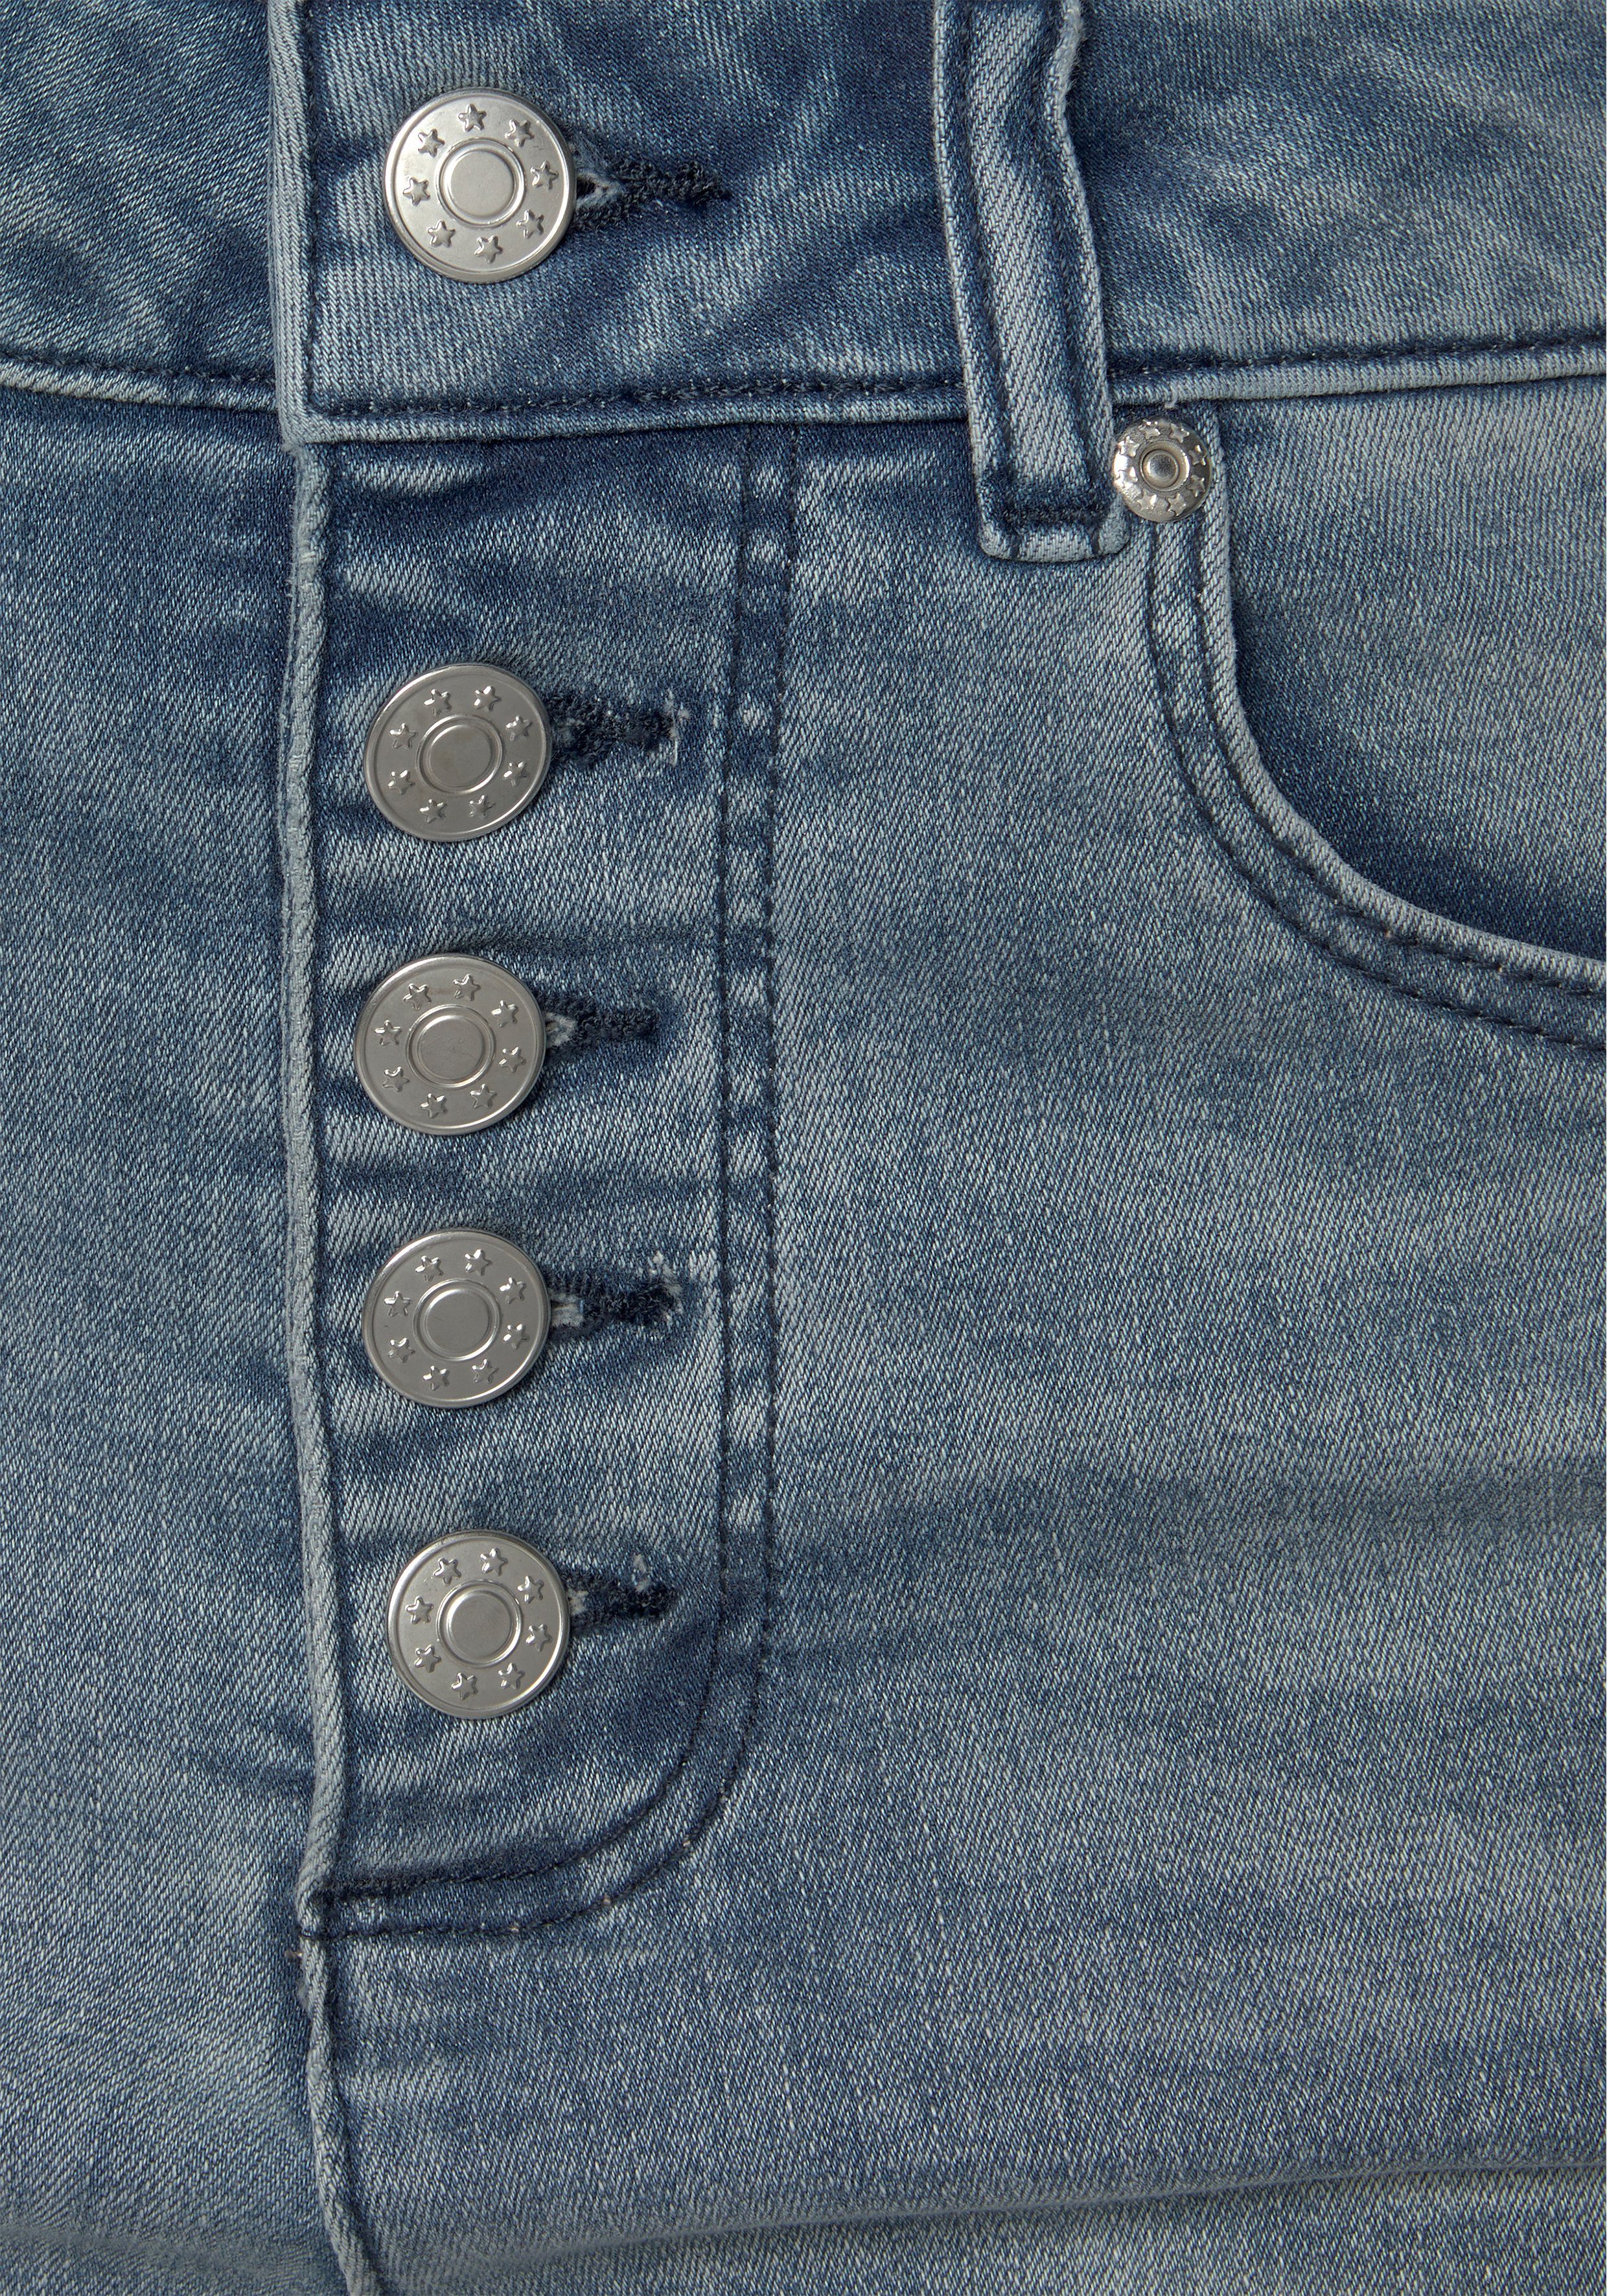 in High-waist-Form Buffalo blue-washed Jeansshorts